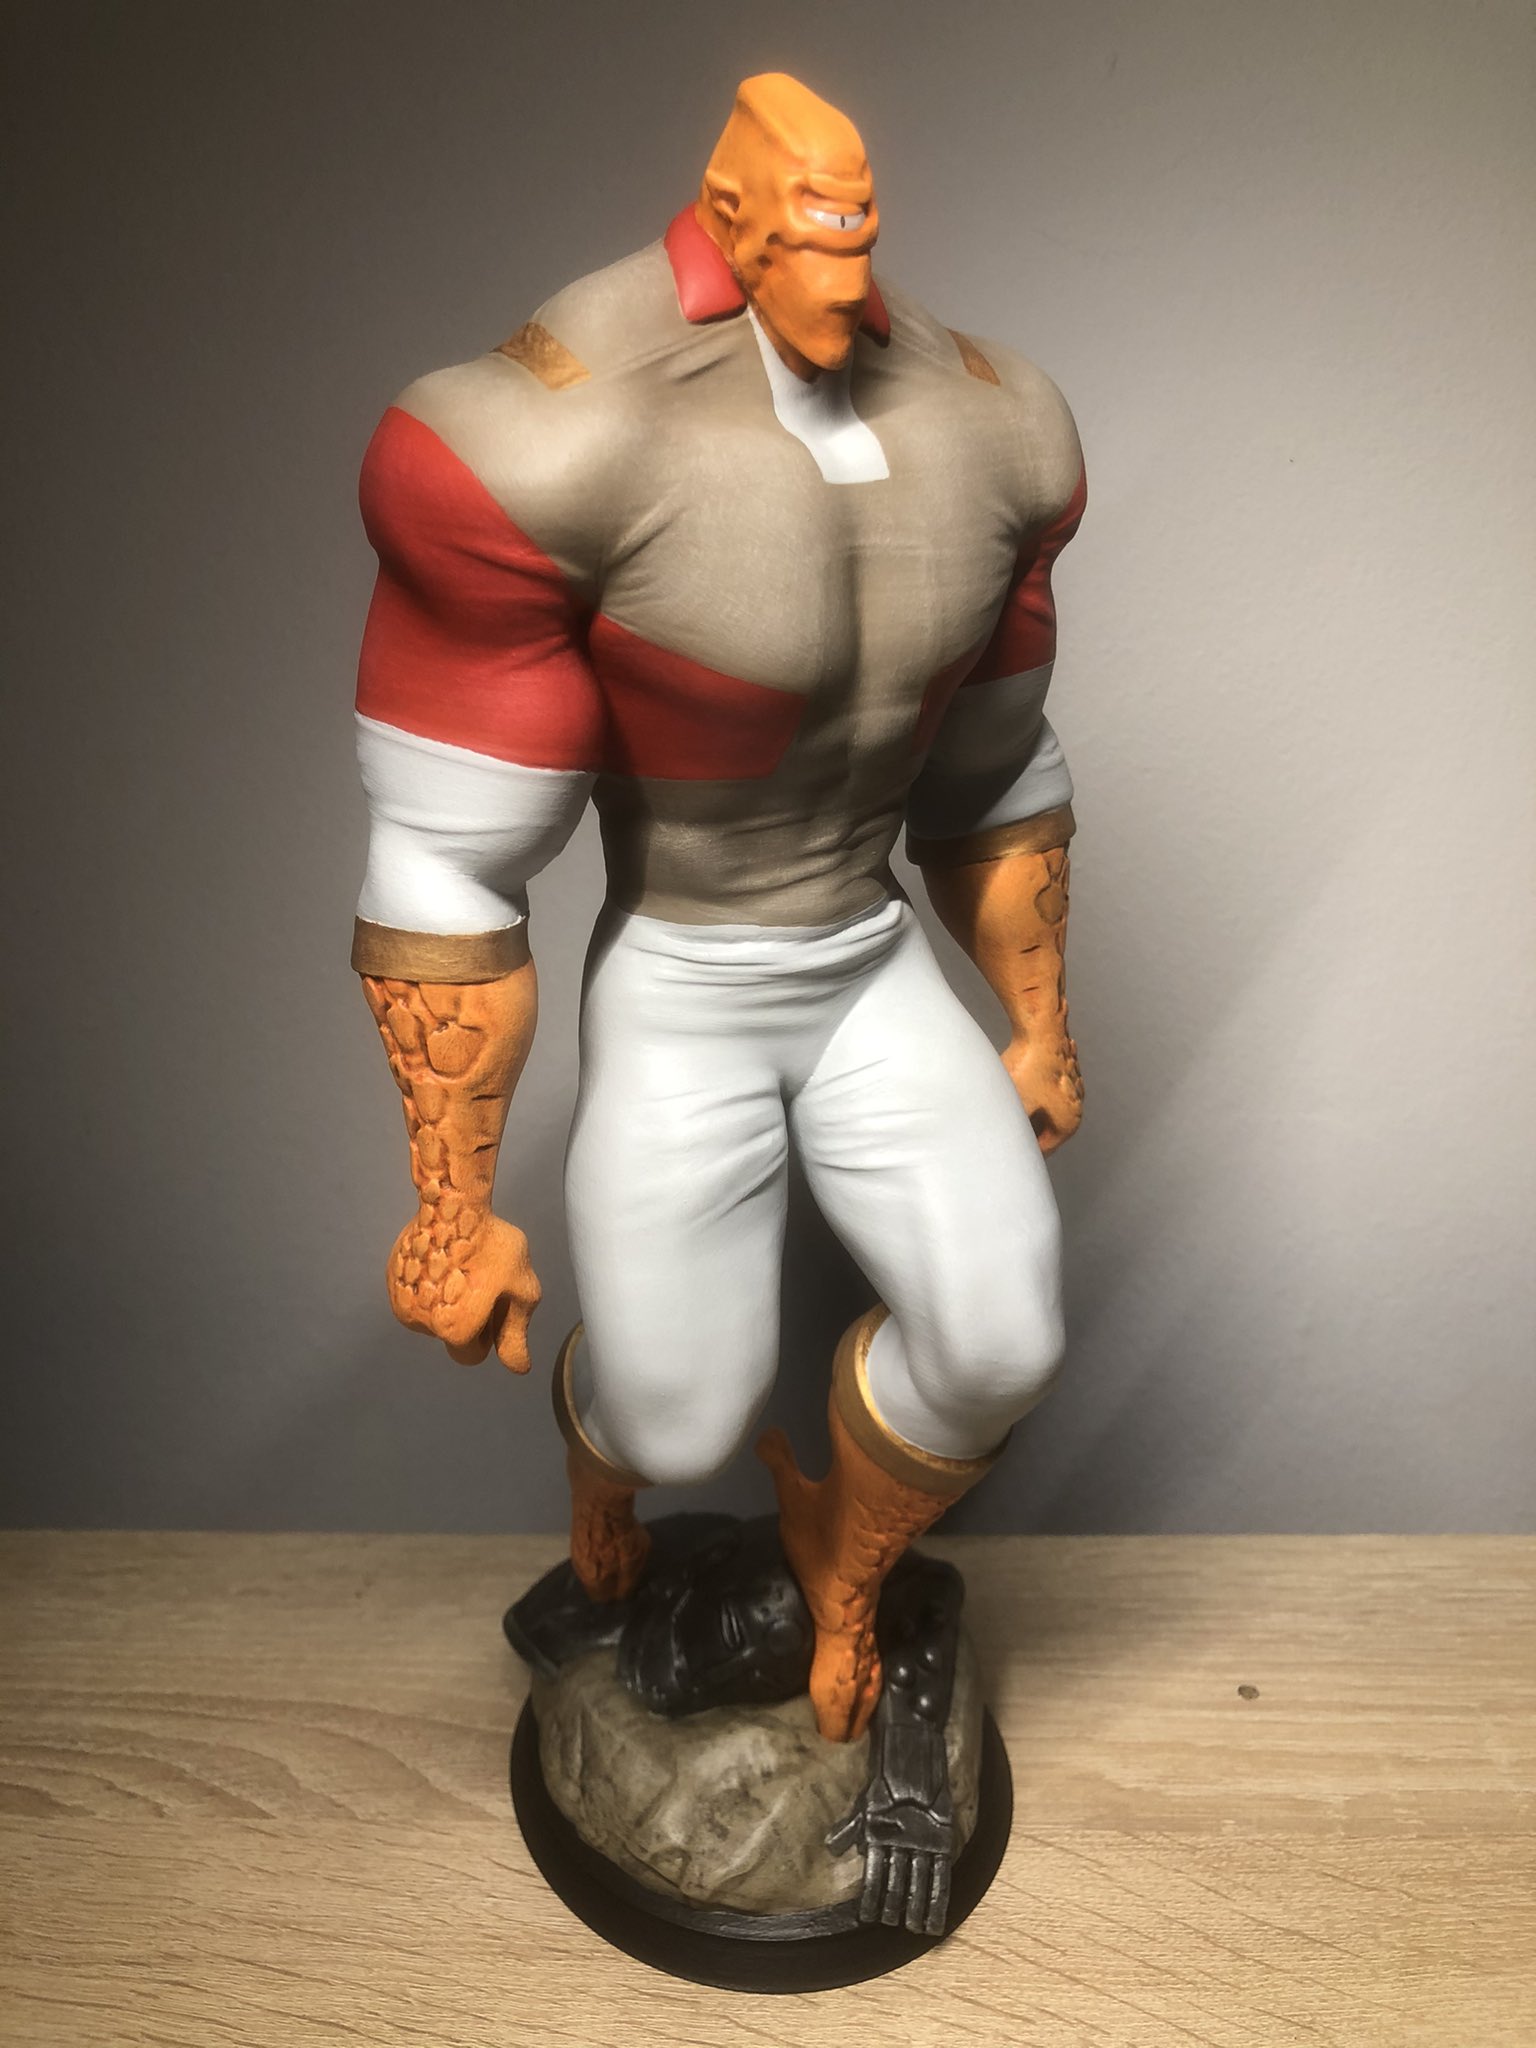 Roger Soler Serrano on X: The biggest Invincible action figure ever made!  1/6 scale (28cm/ 11”) Thanks to @3dzipguy for the 3d body archives!  @Skybound @InvincibleHQ @RyanOttley @RobertKirkman @InvincibleCast  @InvincibleInck #custom #action #